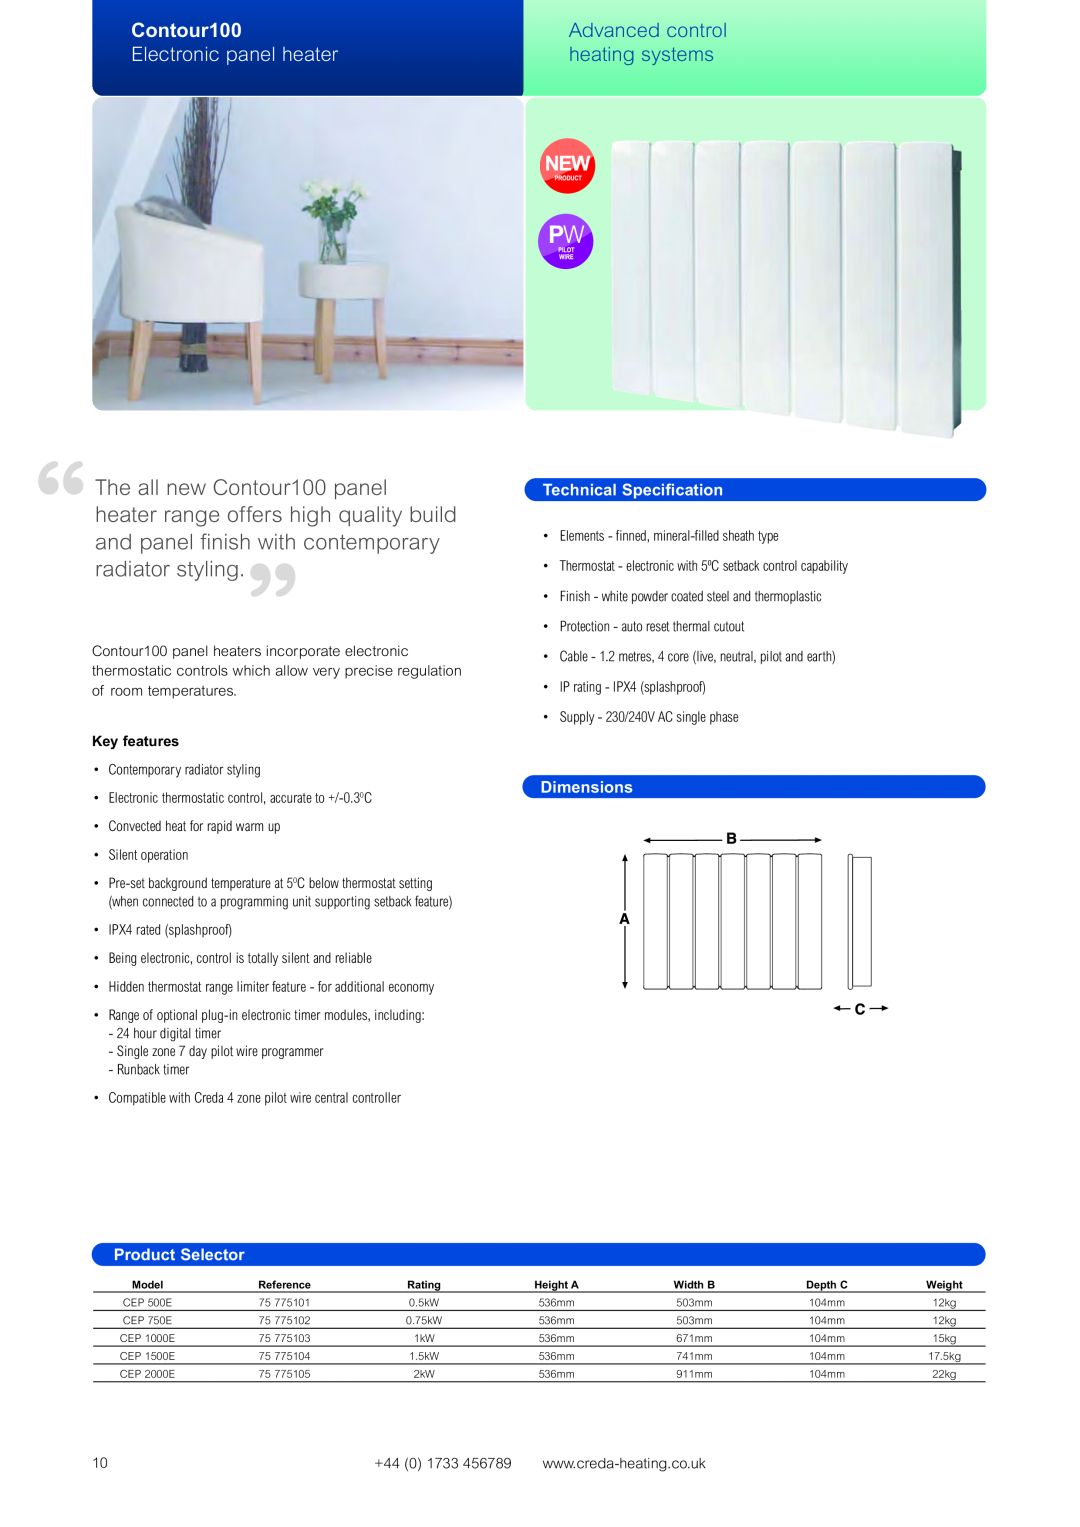 Creda Heating Solution Contour100, Electronic panel heater, Advanced control heating systems, Technical Specification 